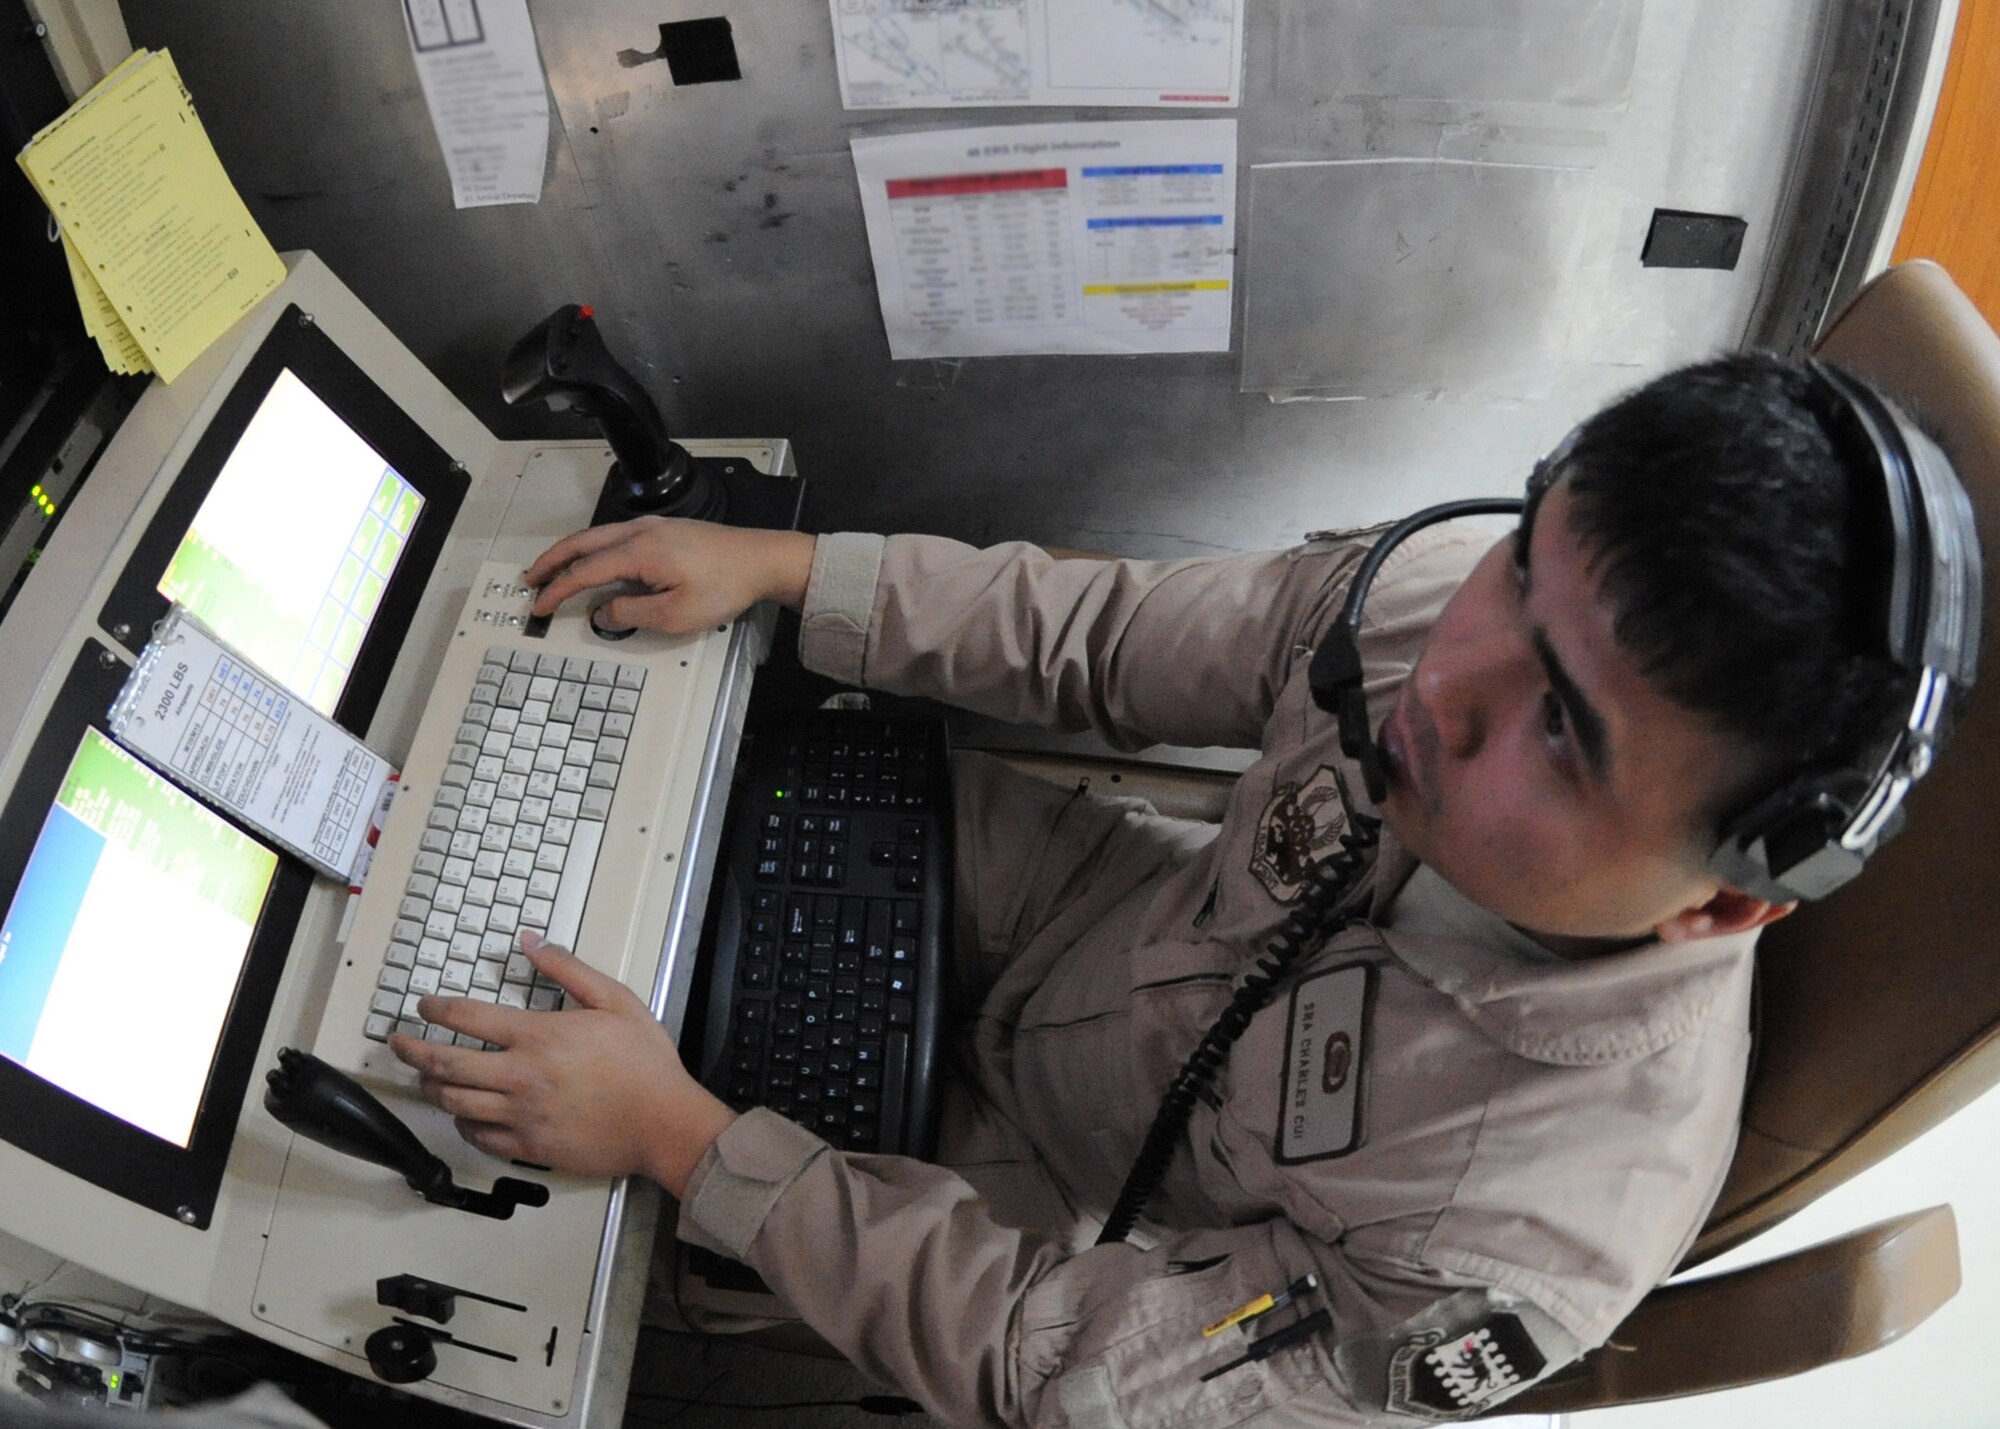 Senior Airman Charles Cui, a 46th Expeditionary Reconnaissance and Attack Squadron sensor operator at Joint Base Balad, Iraq, assists with the flight of an unmanned MQ-1 Predator Feb. 13. The Predator system is made up of the ground-control system, a satellite link, personnel and the aircraft. Airman Cui is deployed from Creech Air Force Base, Nev.  (U.S. Air Force photo/Senior Airman Tiffany Trojca)